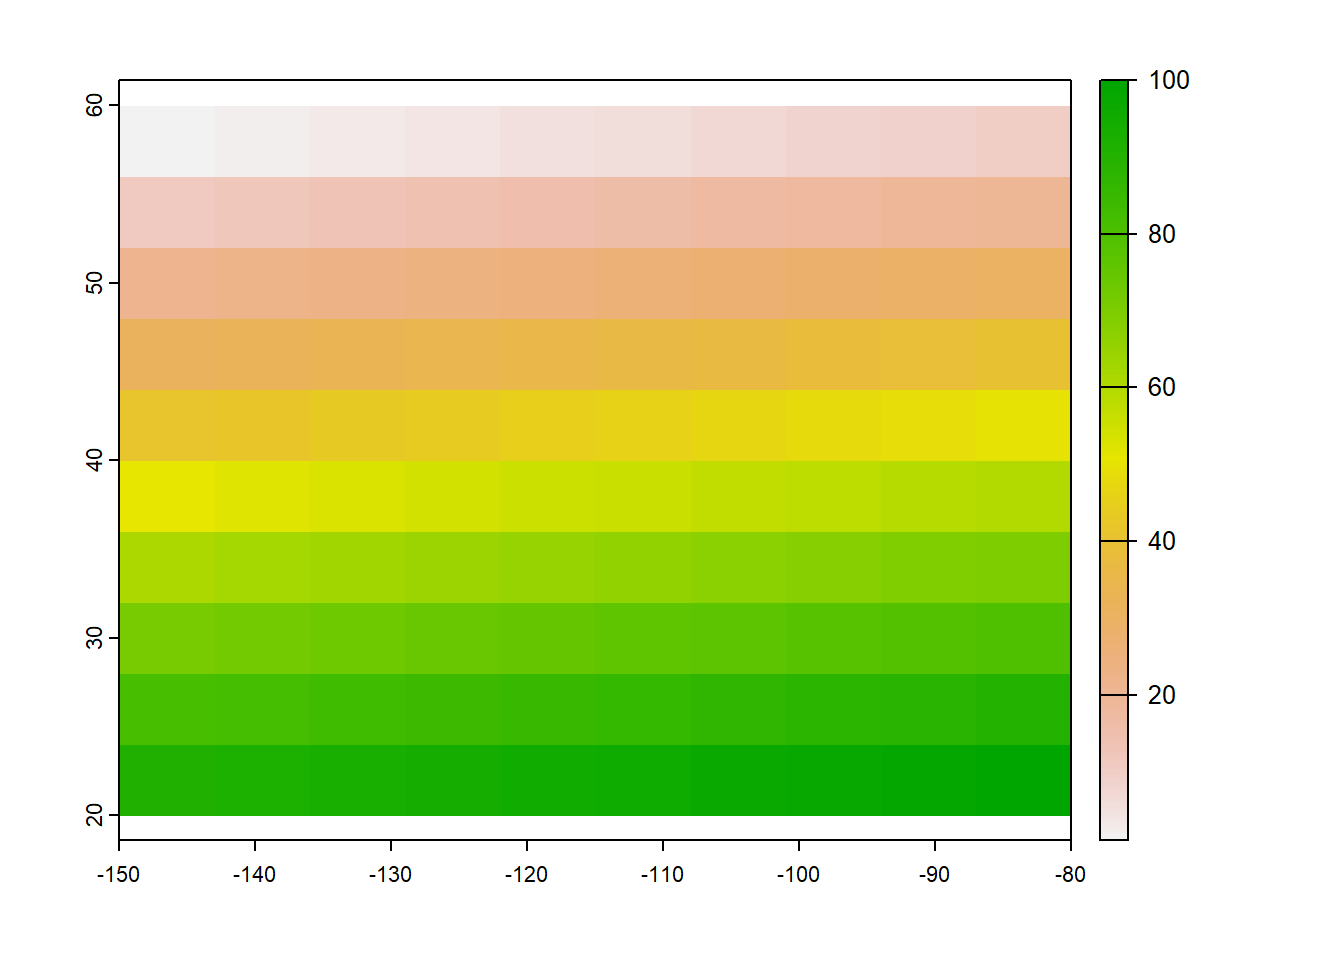 Raster and values corresponding to each of the cells created with **terra**.